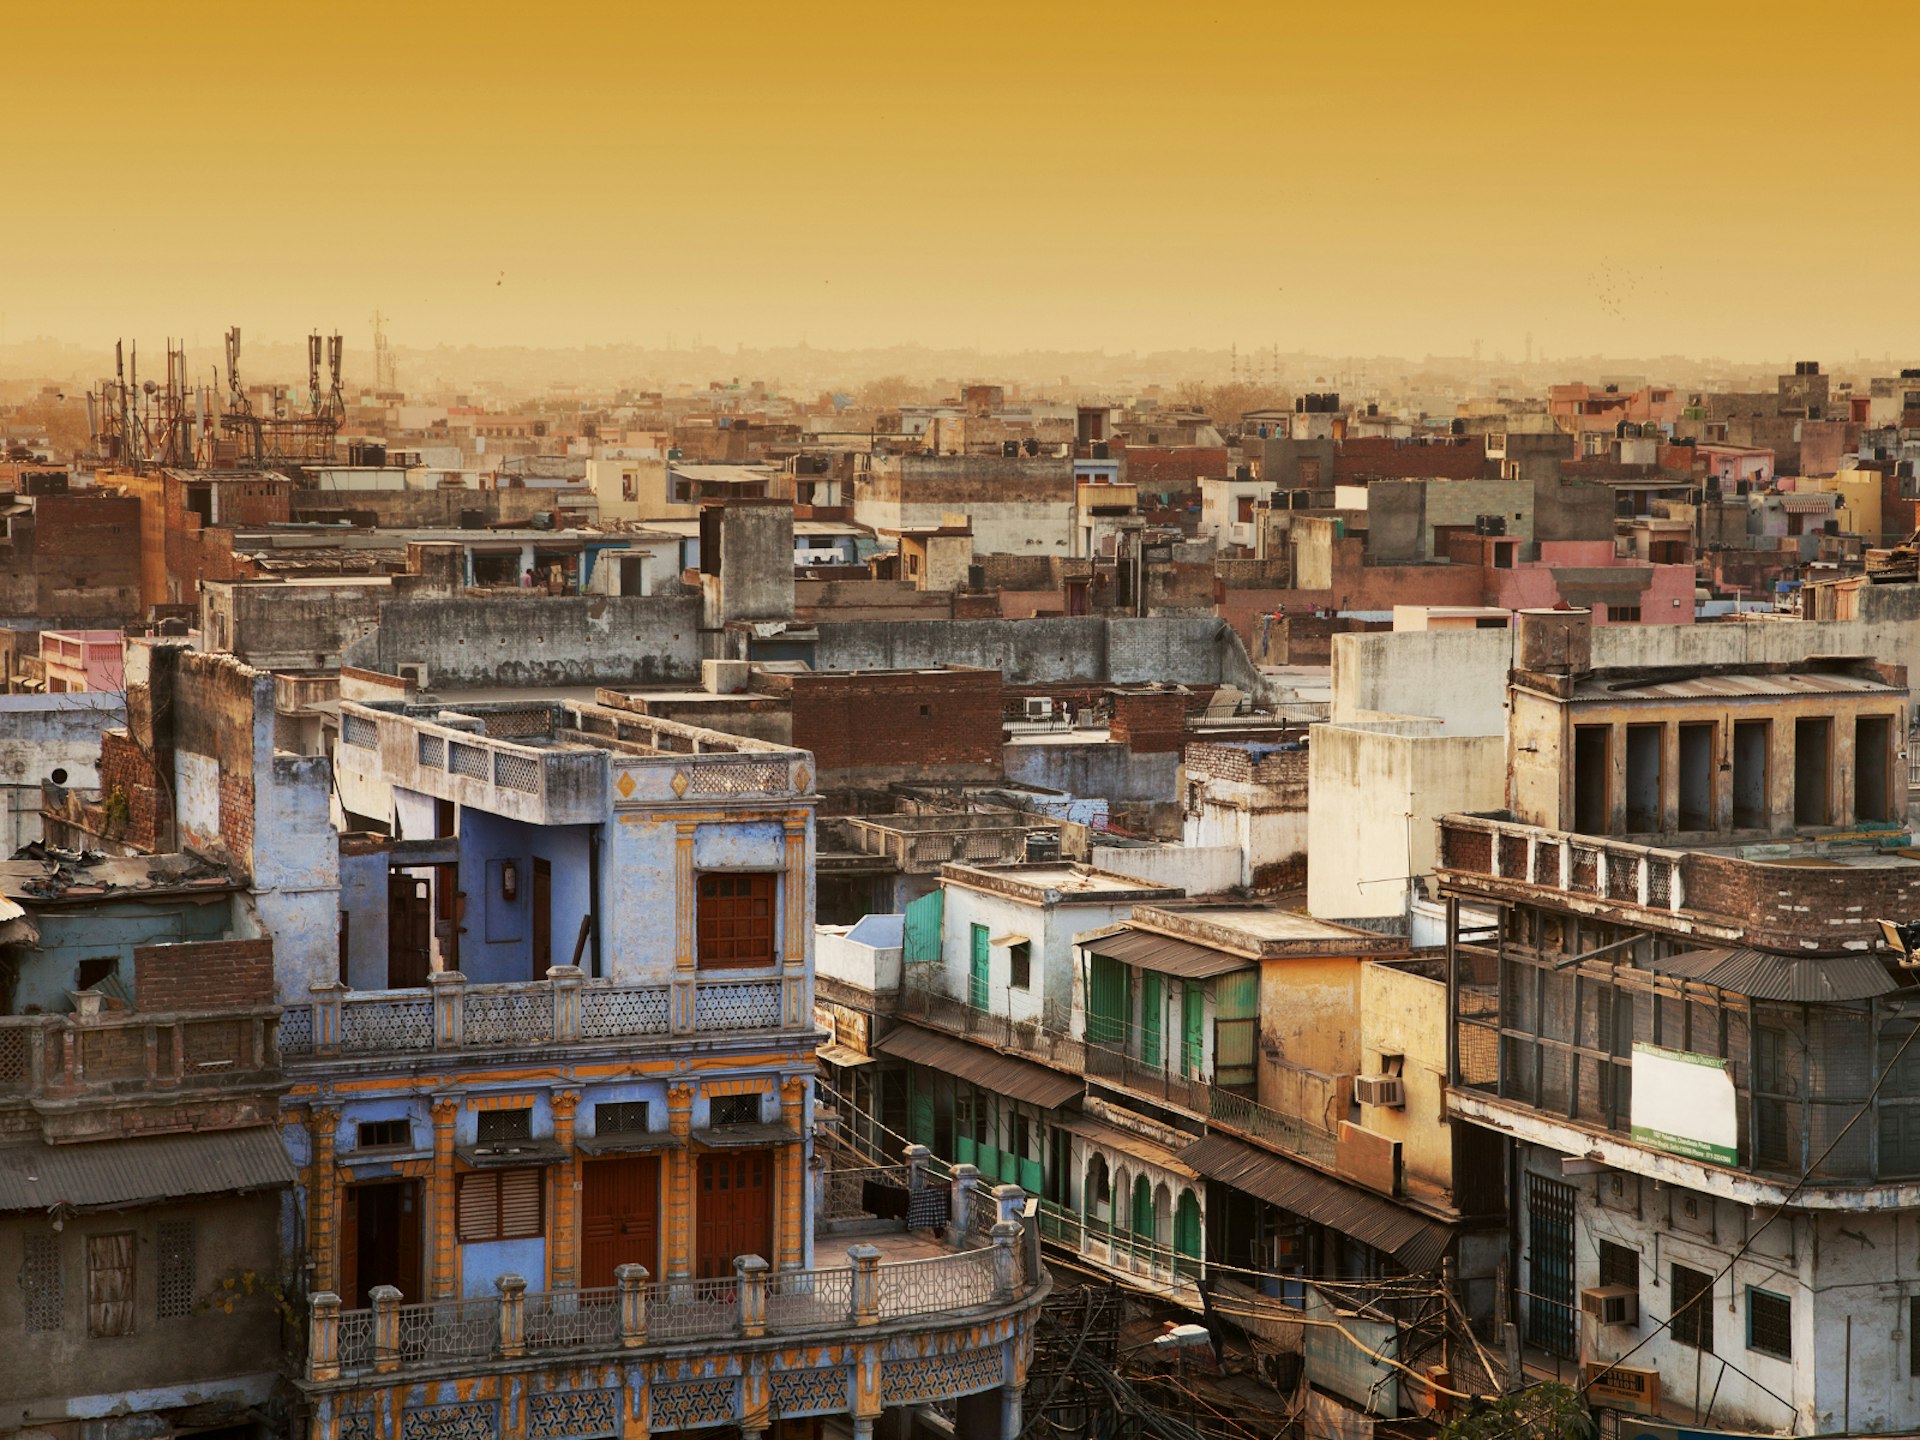 A view over the rooftops of Delhi